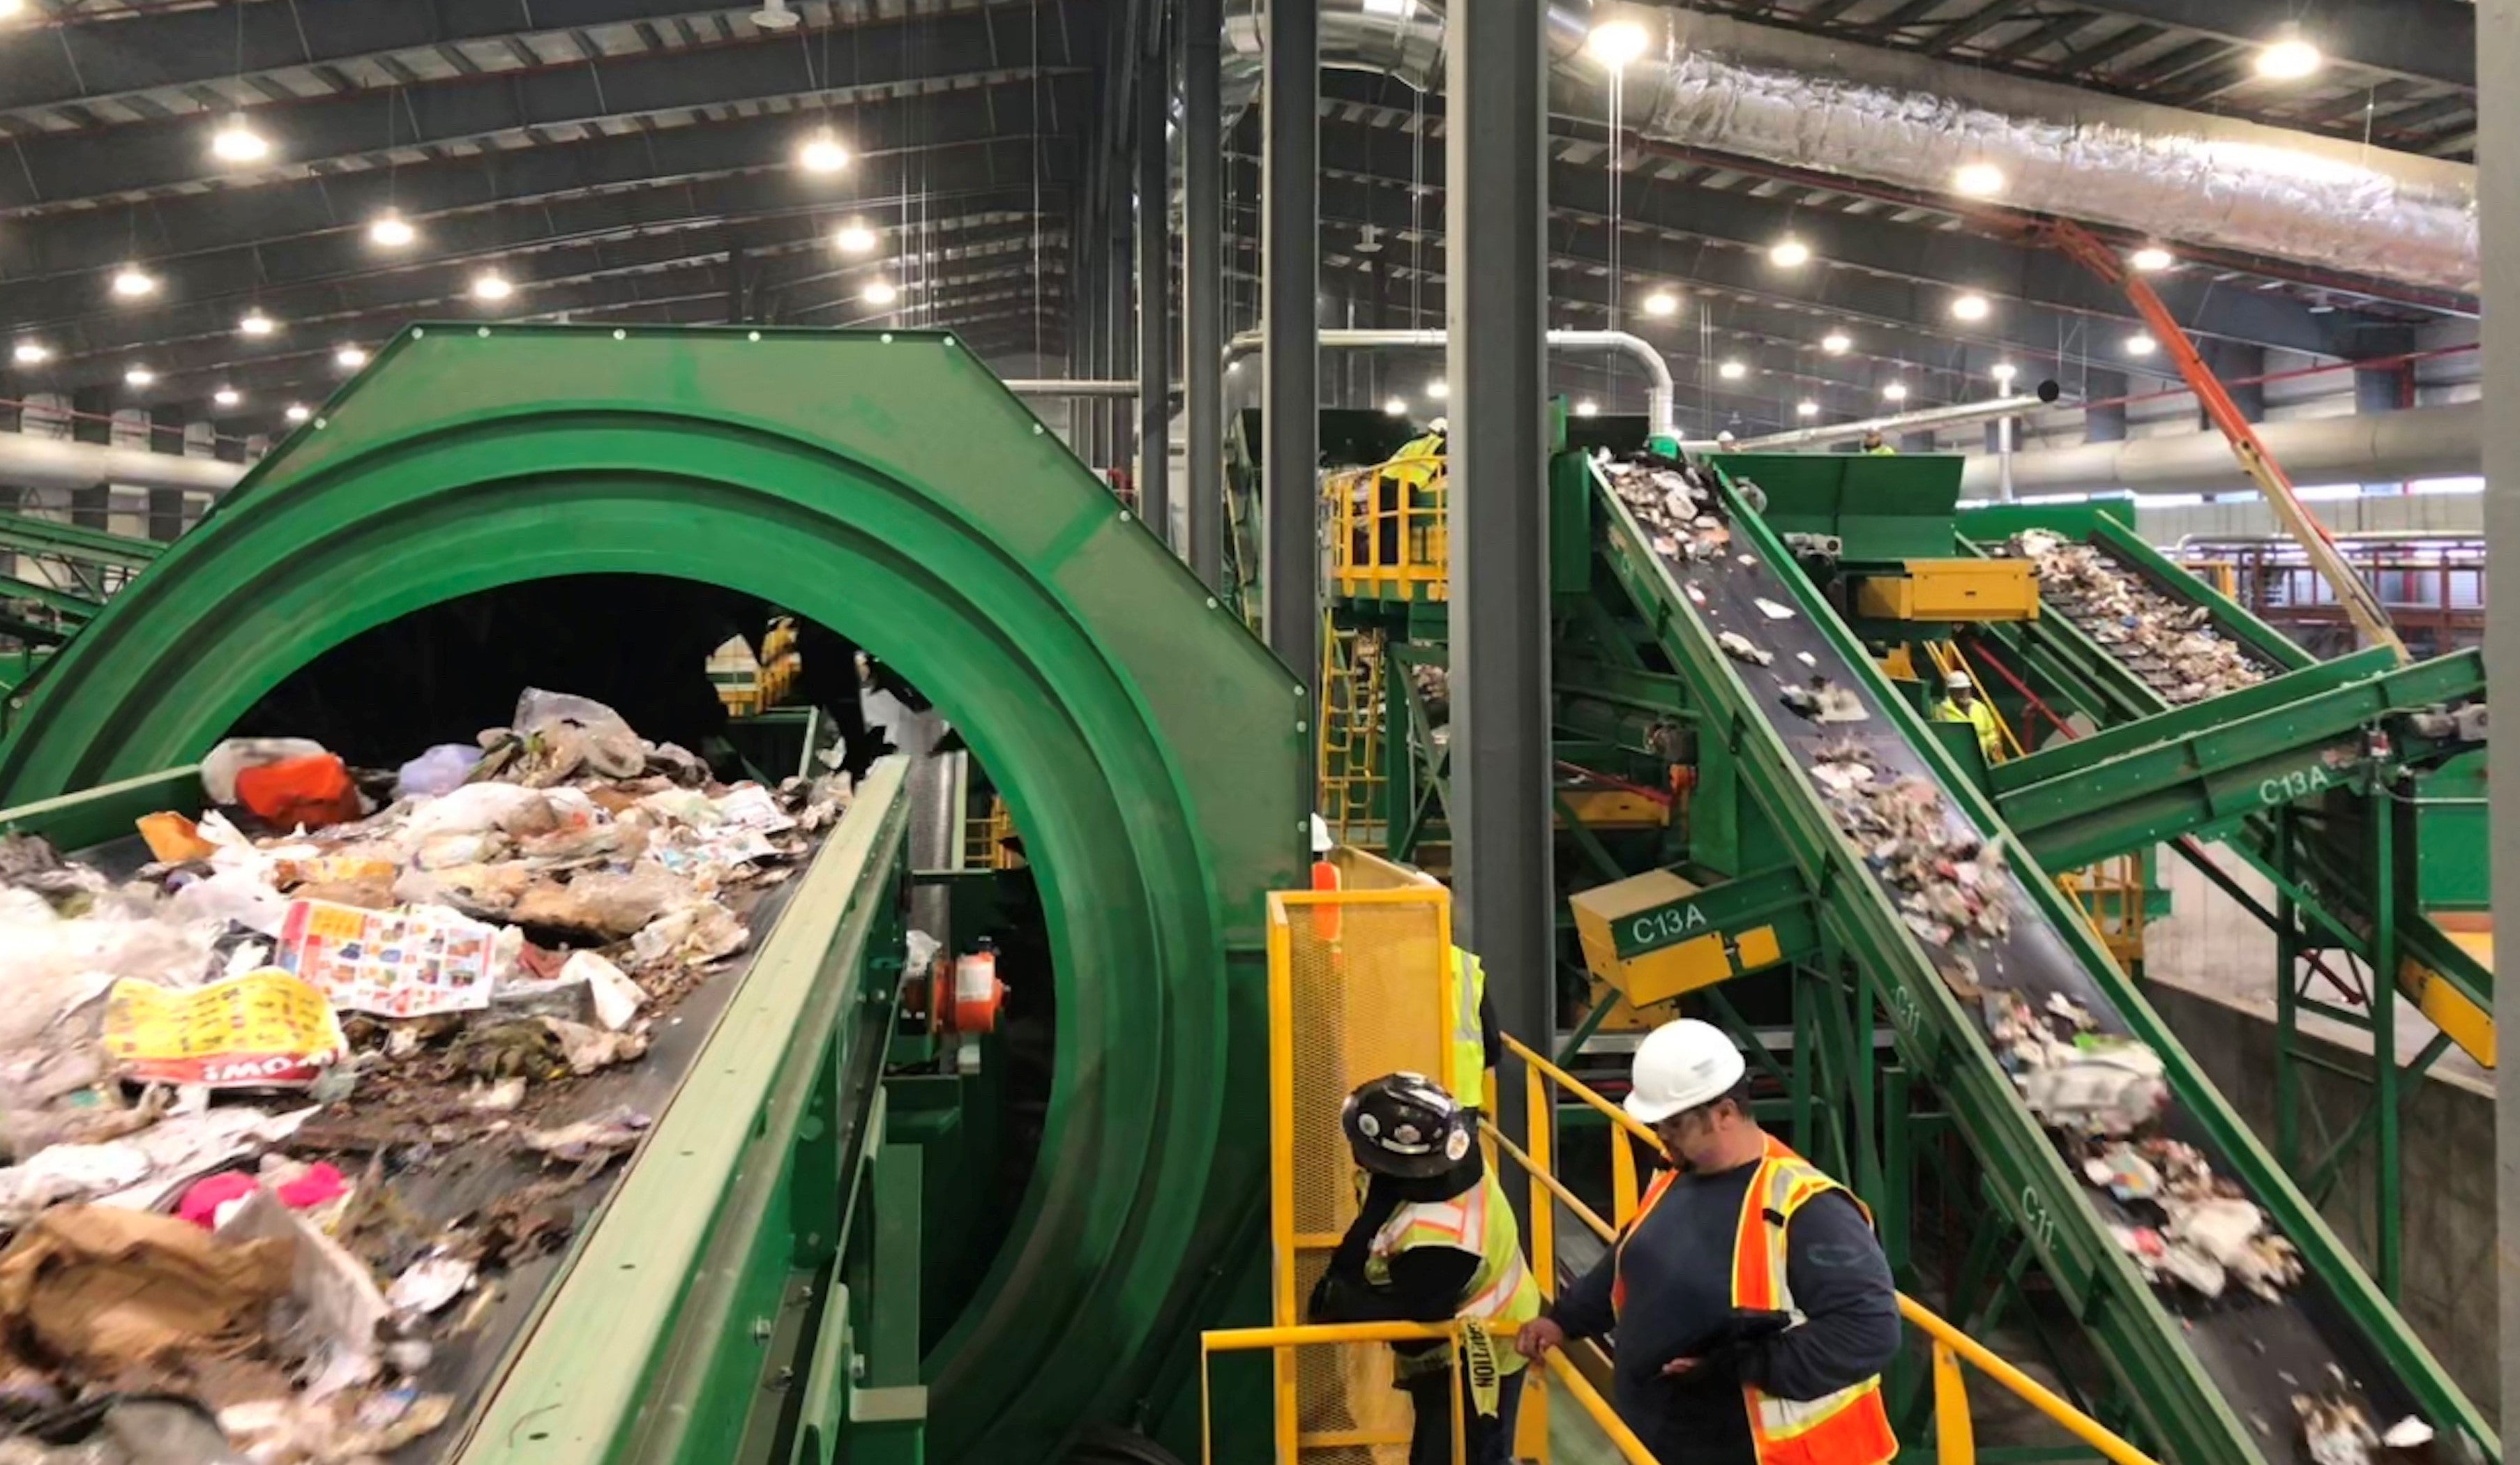 As Maine communities curtail recycling, Hampden waste-to-energy plant